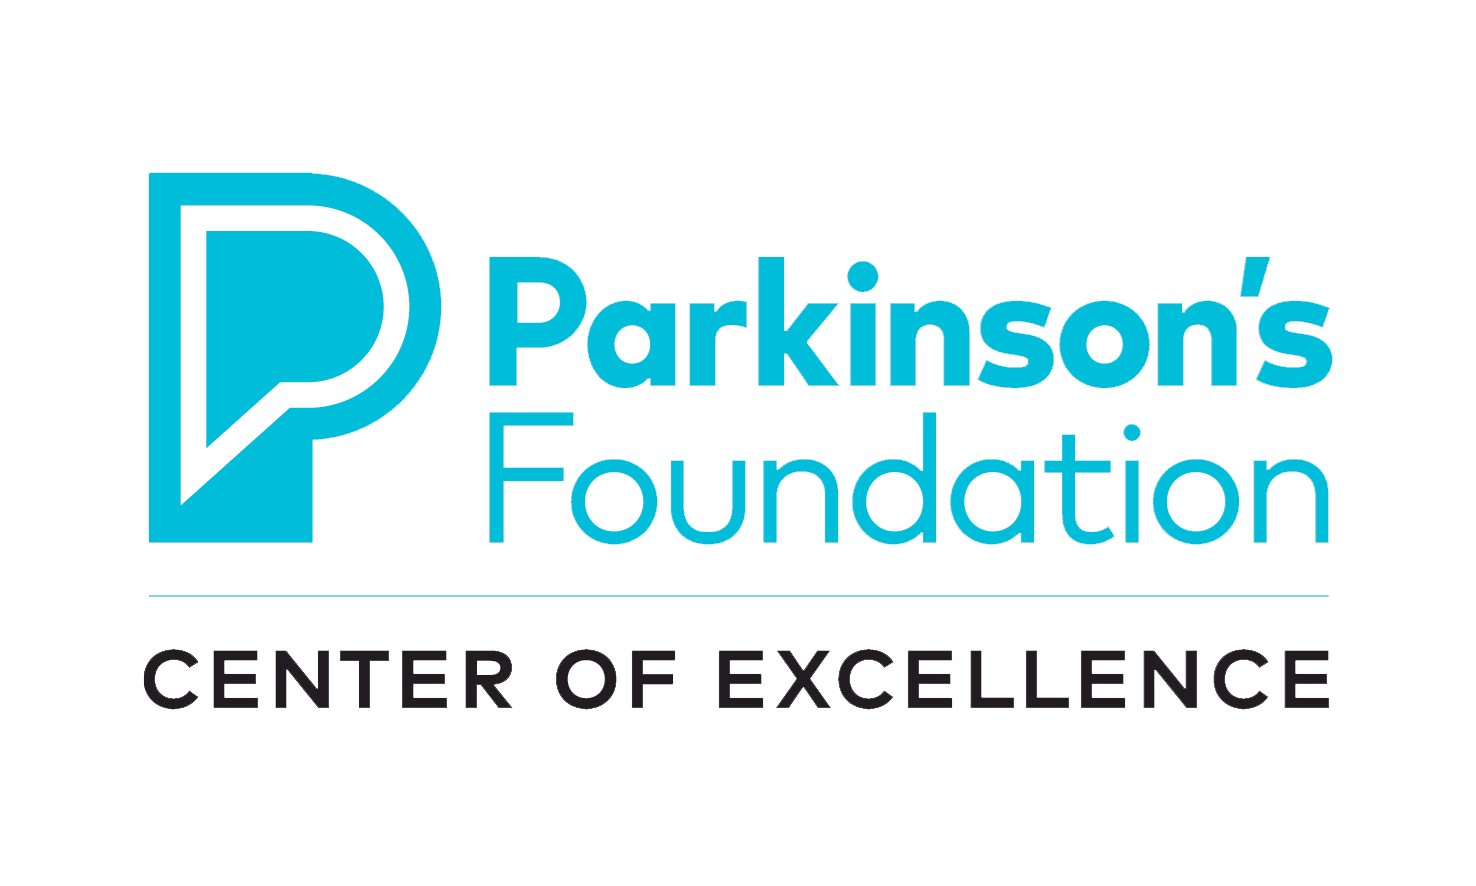 Parkinson's Foundation Center of Excellence